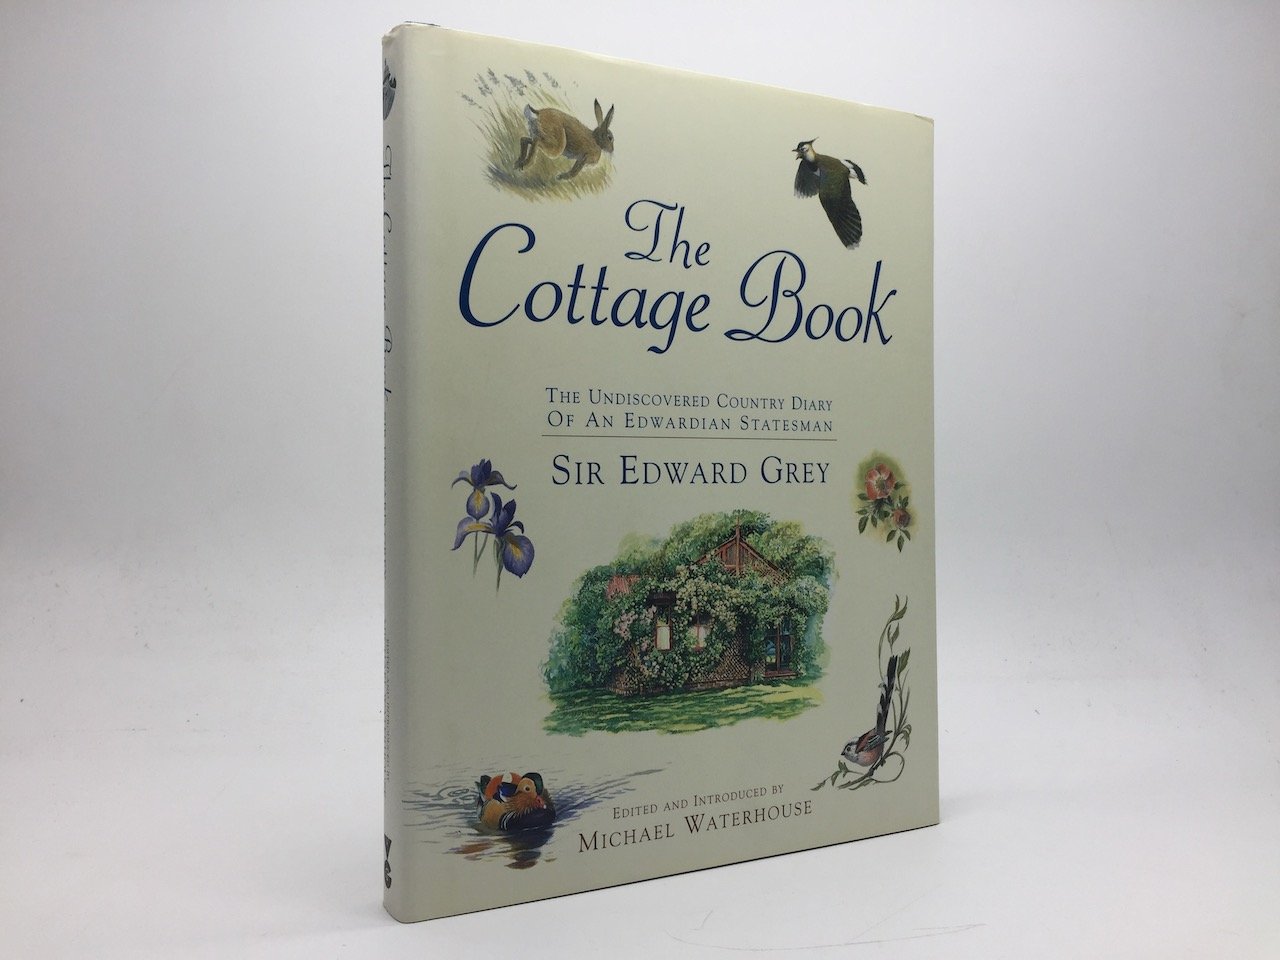 THE COTTAGE BOOK: THE UNDISCOVERED COUNTRY DIARY OF AN EDWARDIAN STATESMAN (SIGNED BY M. WATERHOUSE) - GREY, Sir Edward, Lady Grey, Michael Waterhouse (Ed. & Intro.)